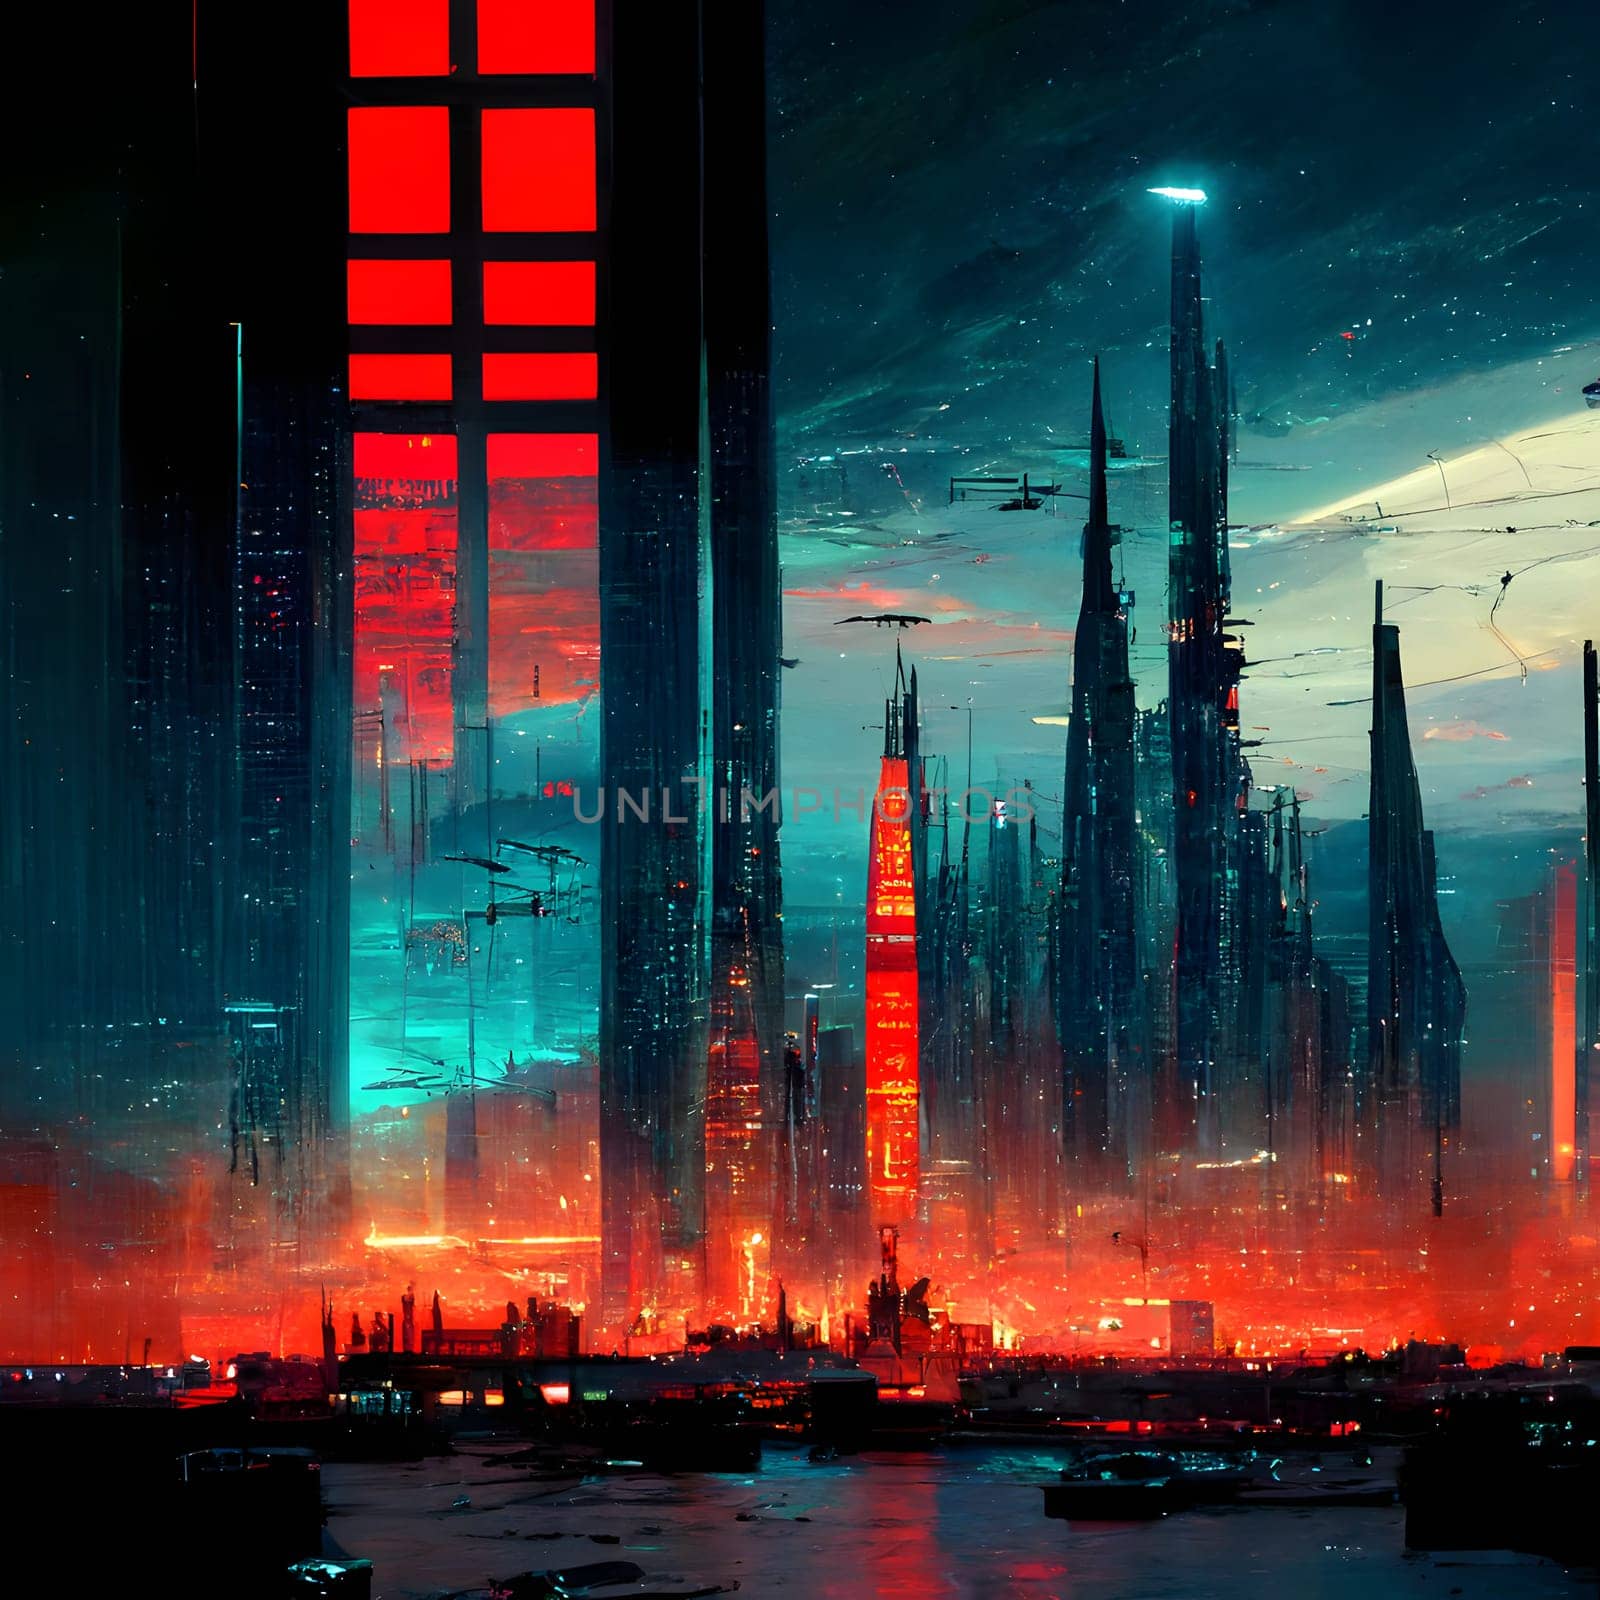 dystopian cyberpunk cityscape in red, cyan and black colors, neural network generated art. Digitally generated image. Not based on any actual person, scene or pattern.